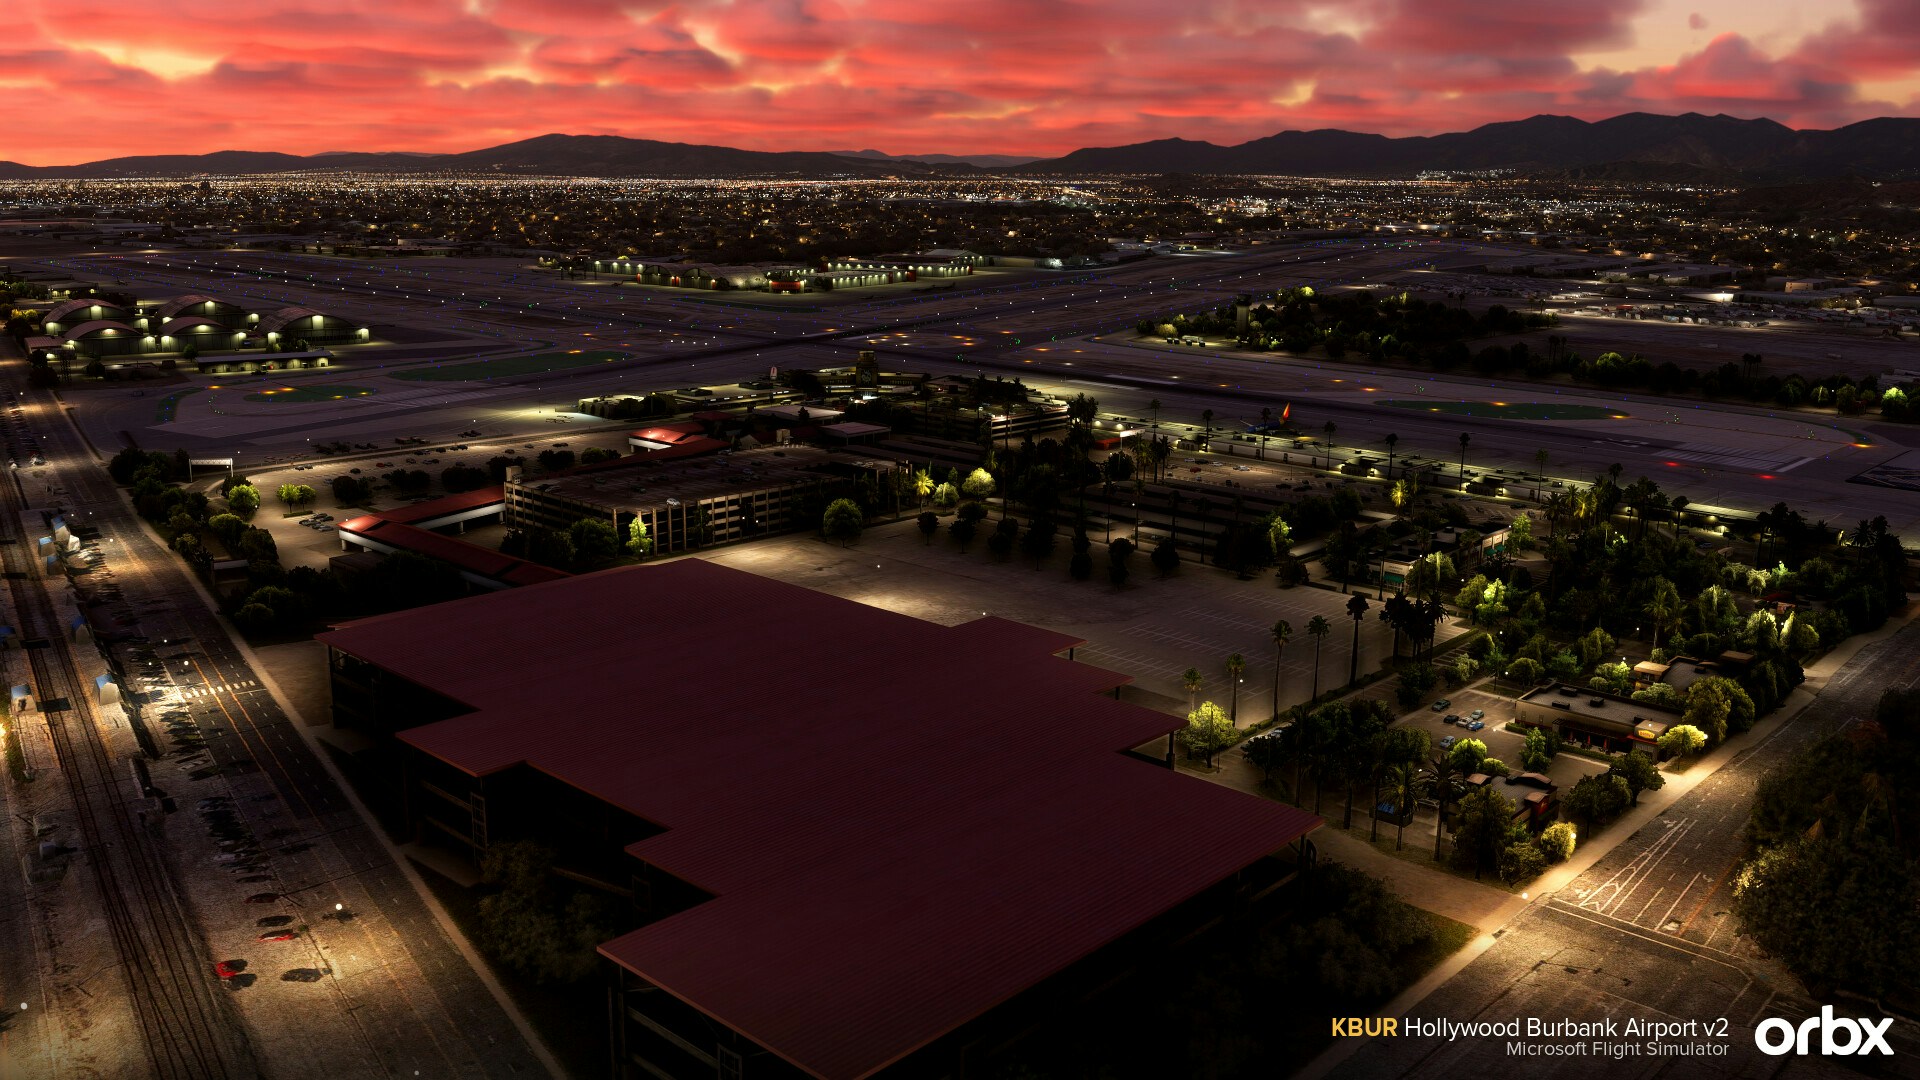 Orbx Announces Hollywood Burbank Airport v2 for MSFS